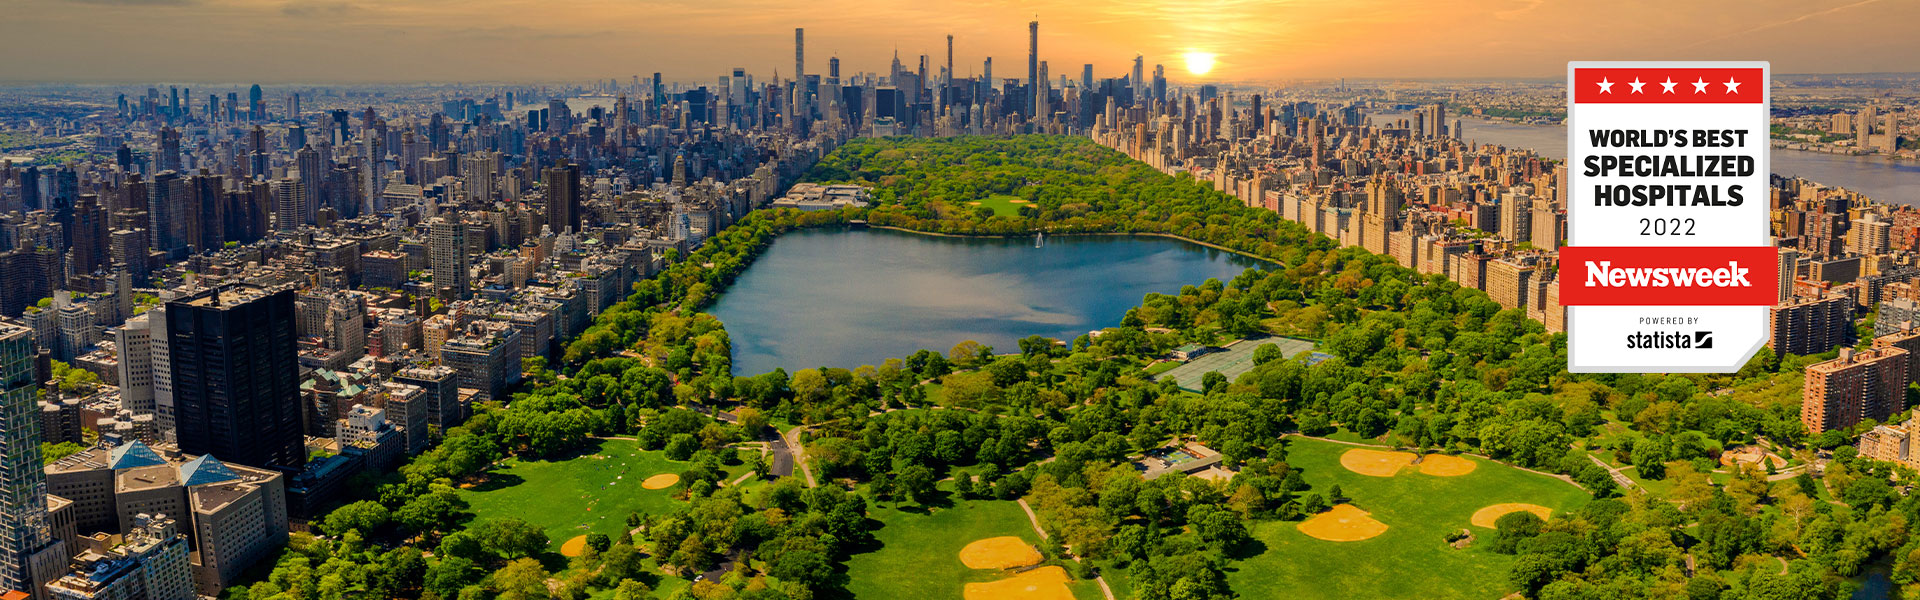 NYC and Central Park